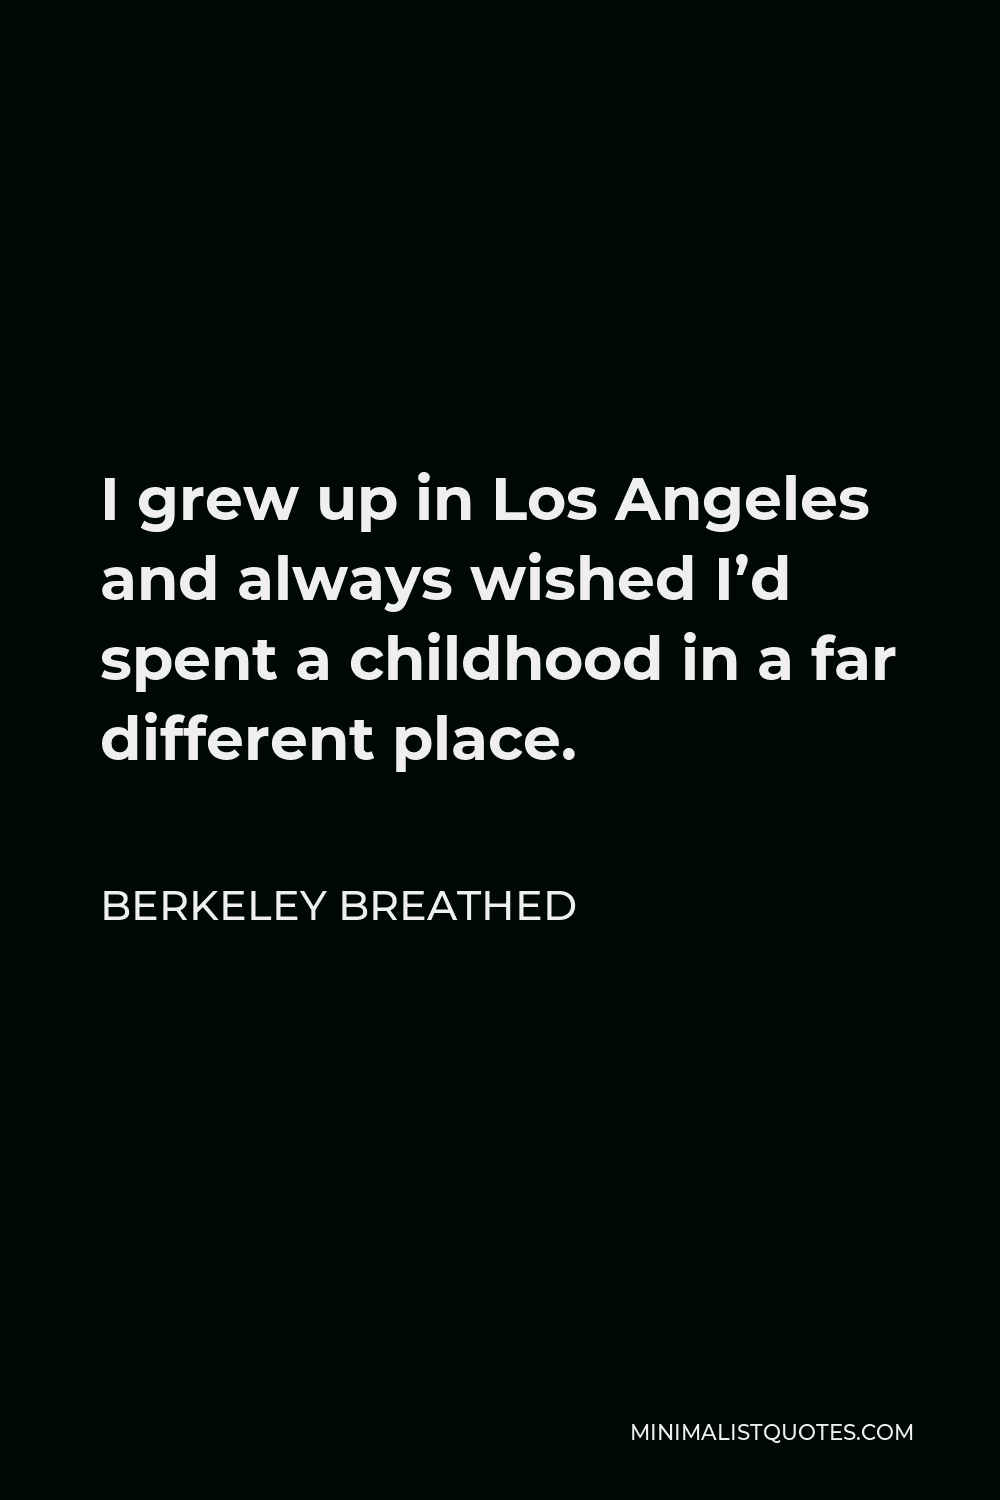 Berkeley Breathed Quote - I grew up in Los Angeles and always wished I’d spent a childhood in a far different place.